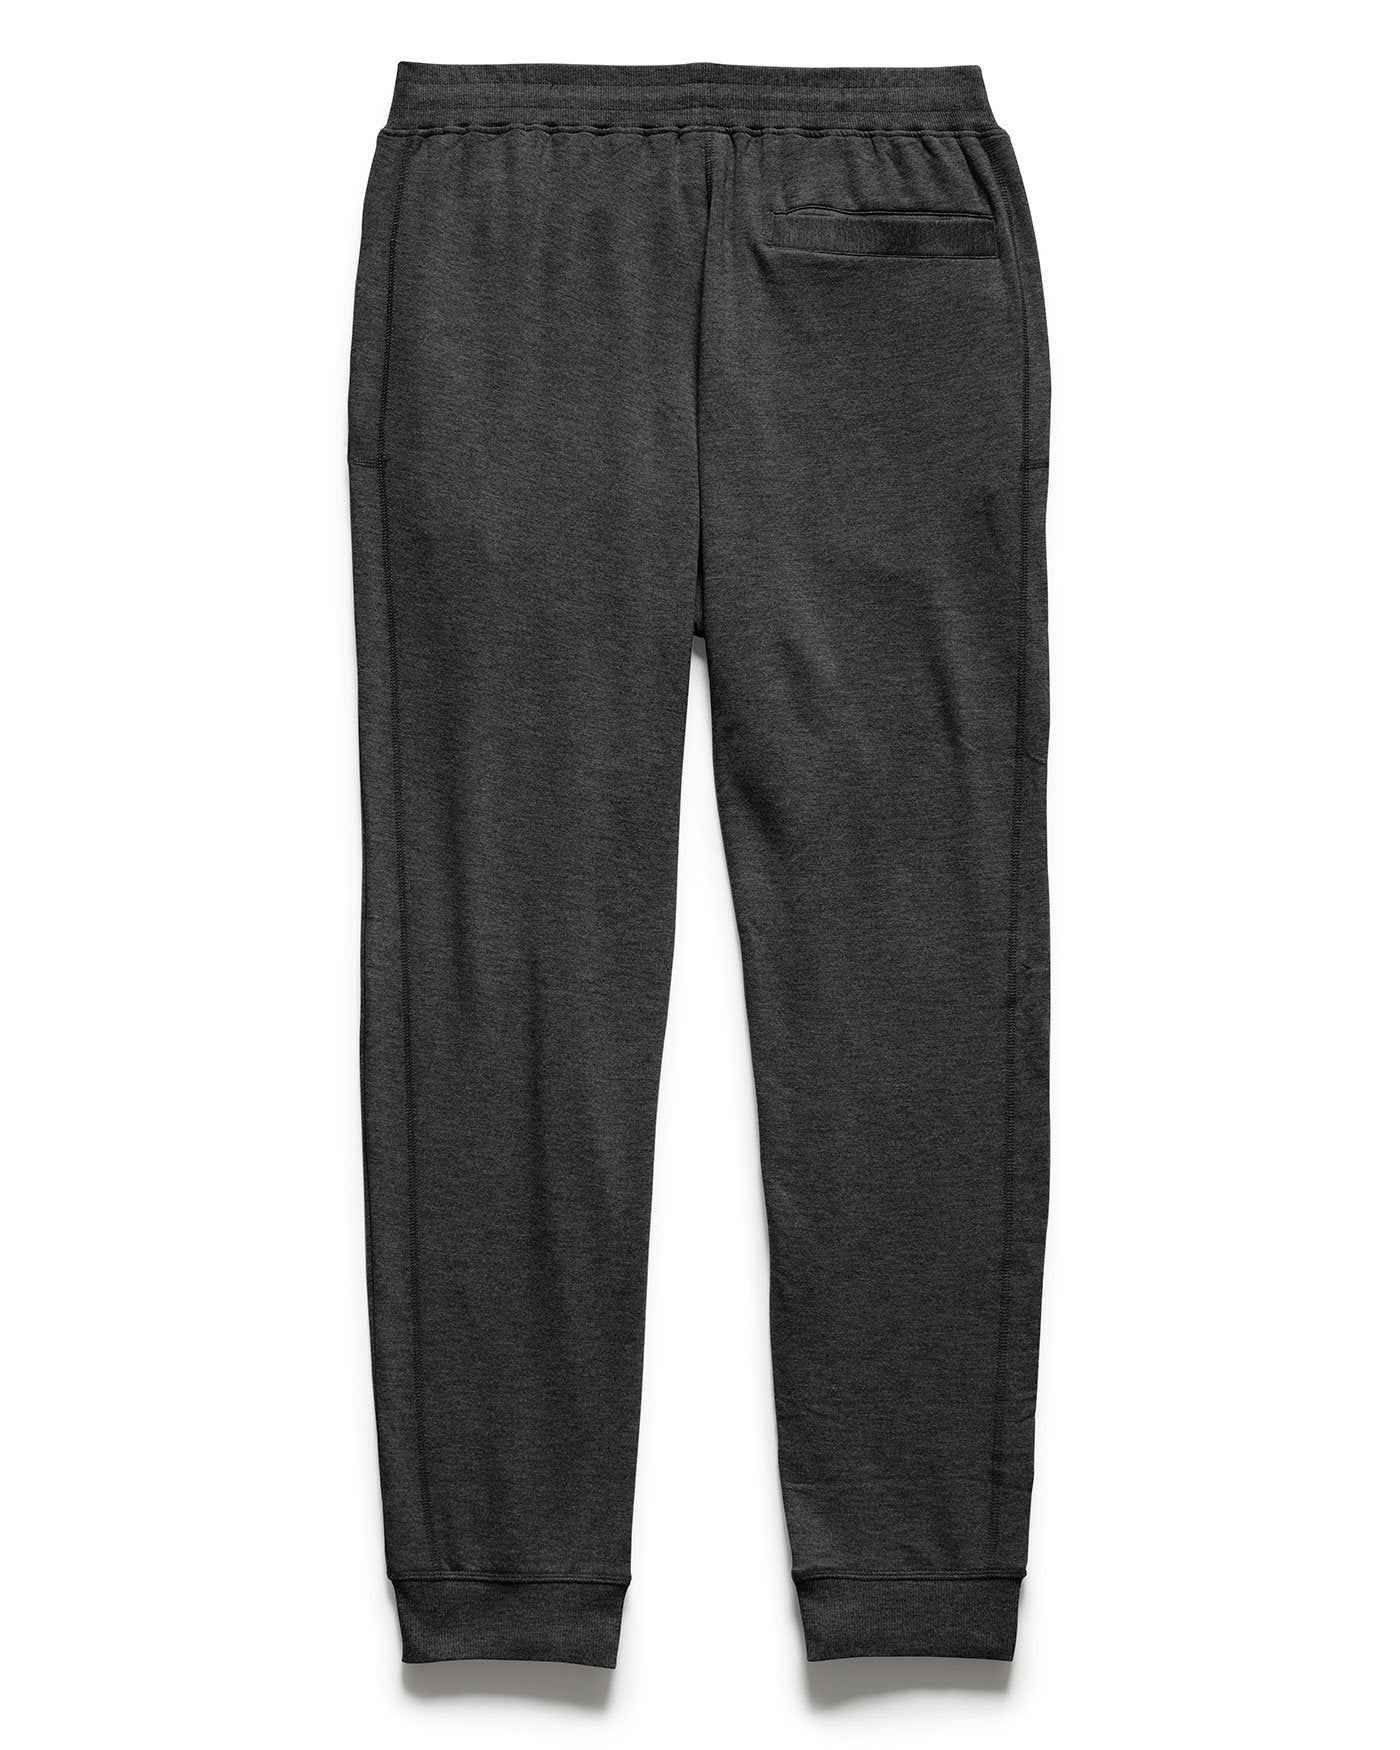 FLAG AND ANTHEM Men's Pants Flag And Anthem Madeflex Victory Jogger Sweatpant || David's Clothing